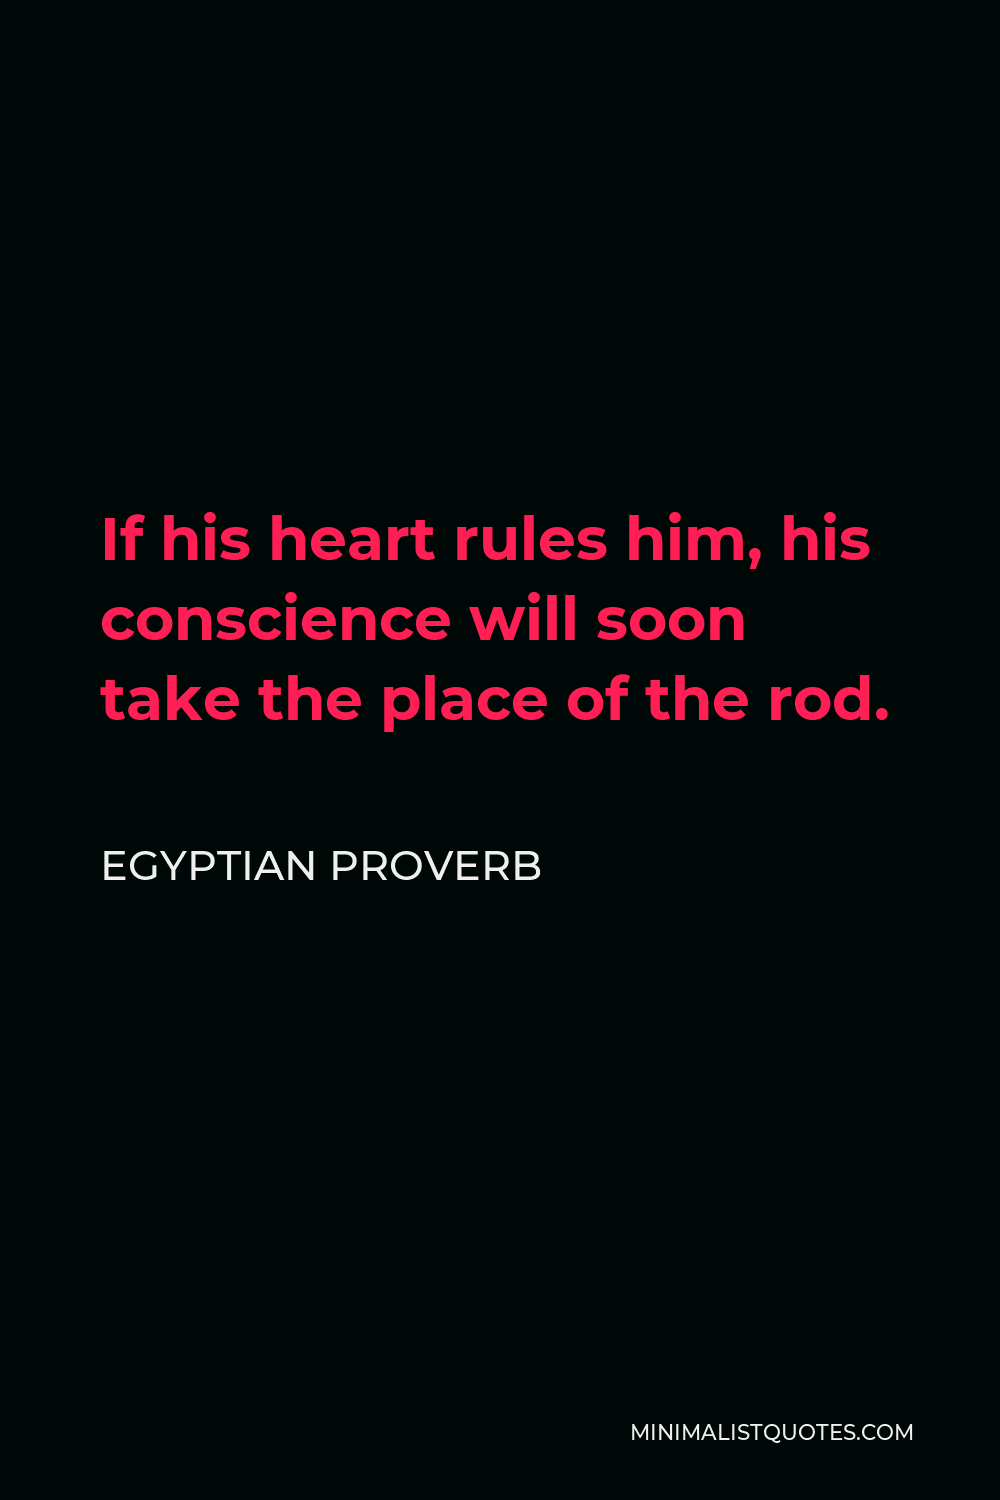 Egyptian Proverb Quote - If his heart rules him, his conscience will soon take the place of the rod.